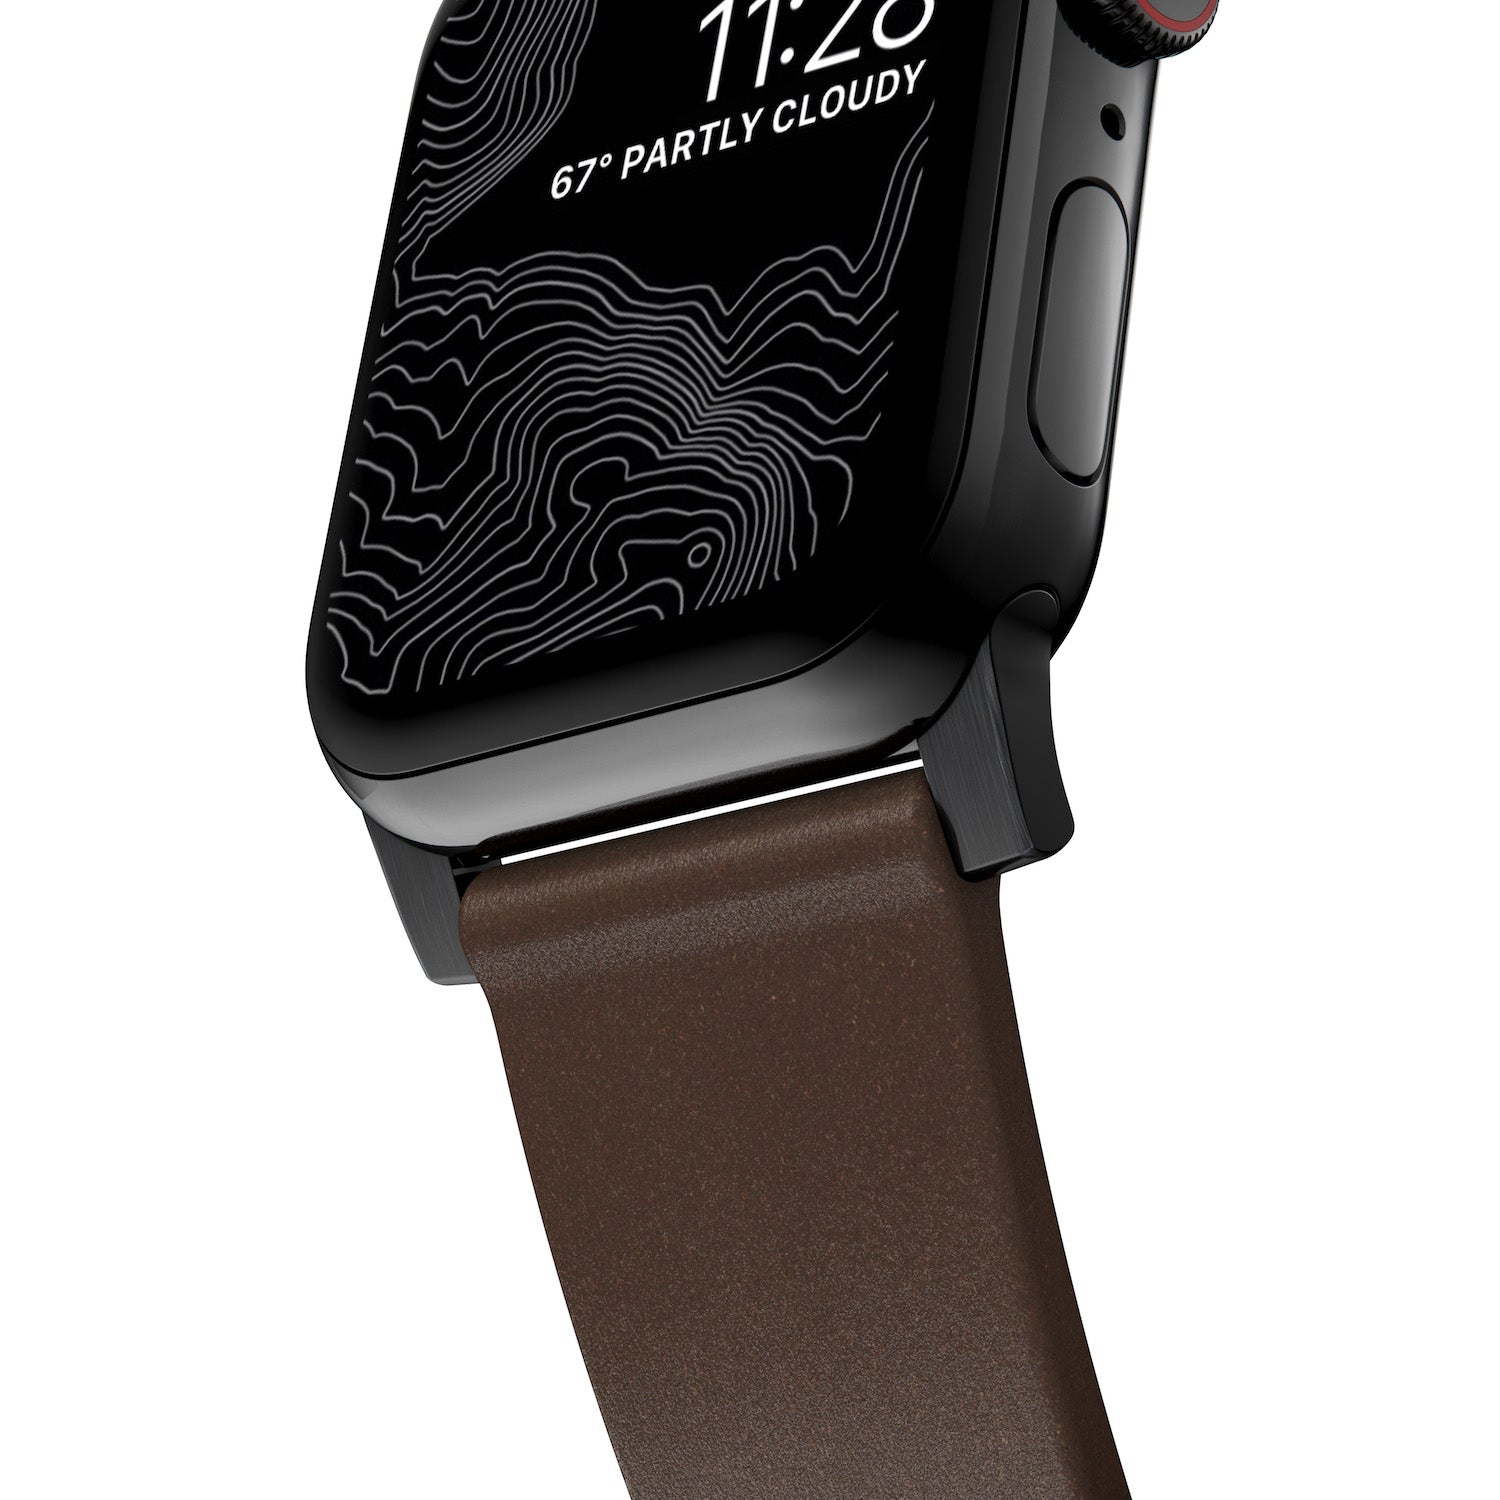 Horween Band for Apple Watch 38/40/41mm - Rustic Brown w/ Black Hardware